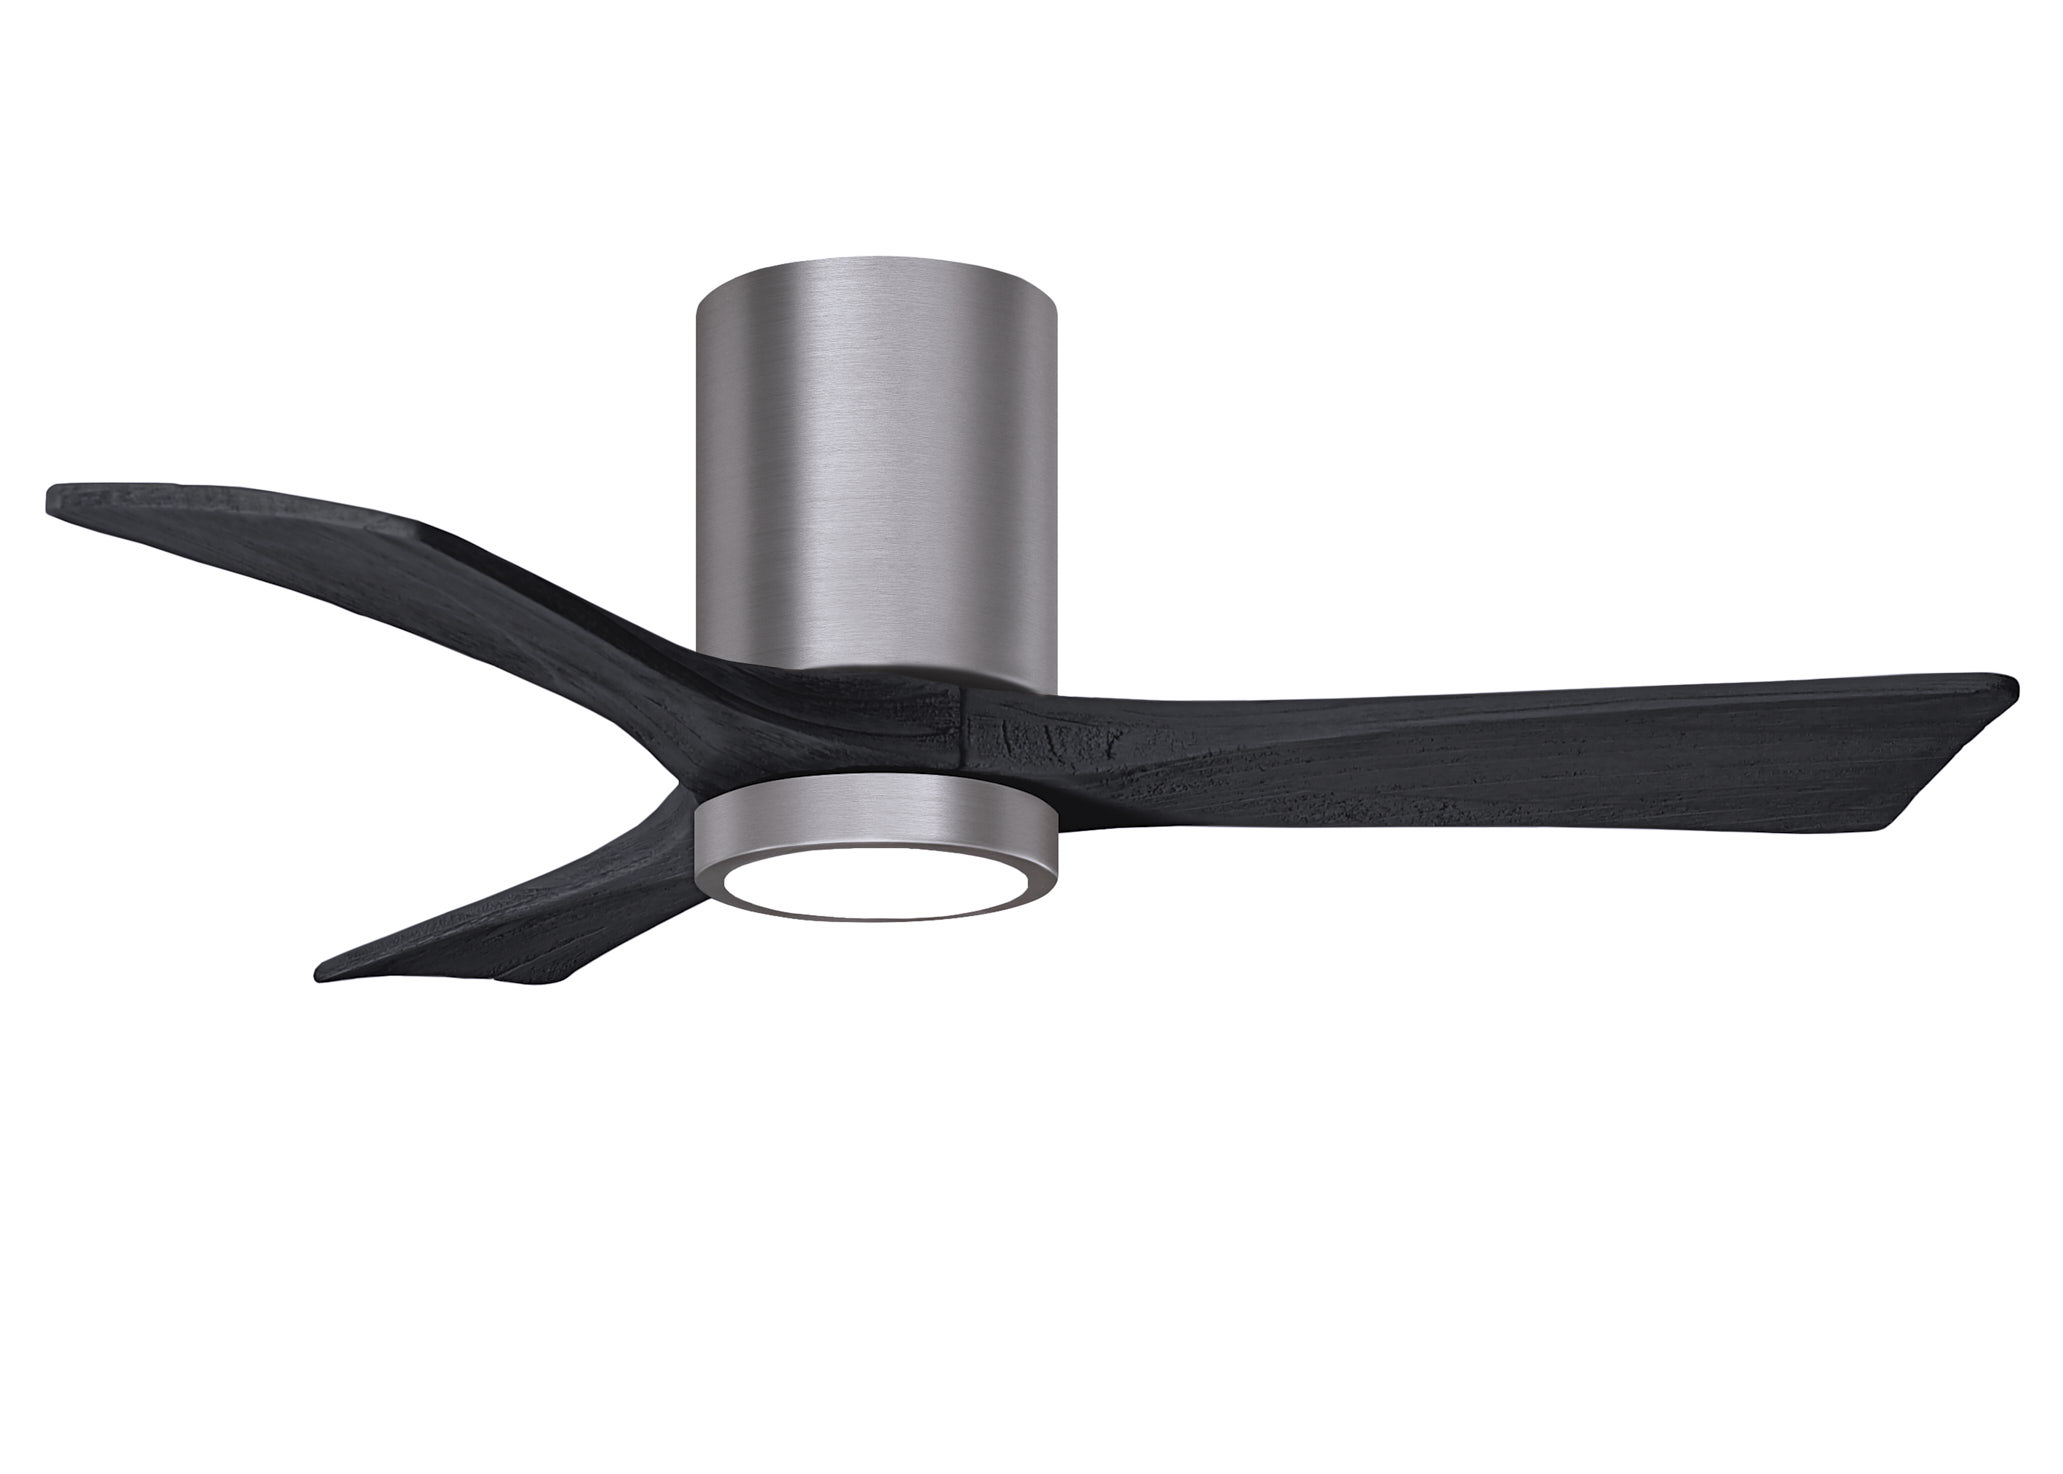 Irene-3HLK 6-speed ceiling fan in brushed pewter finish with 42